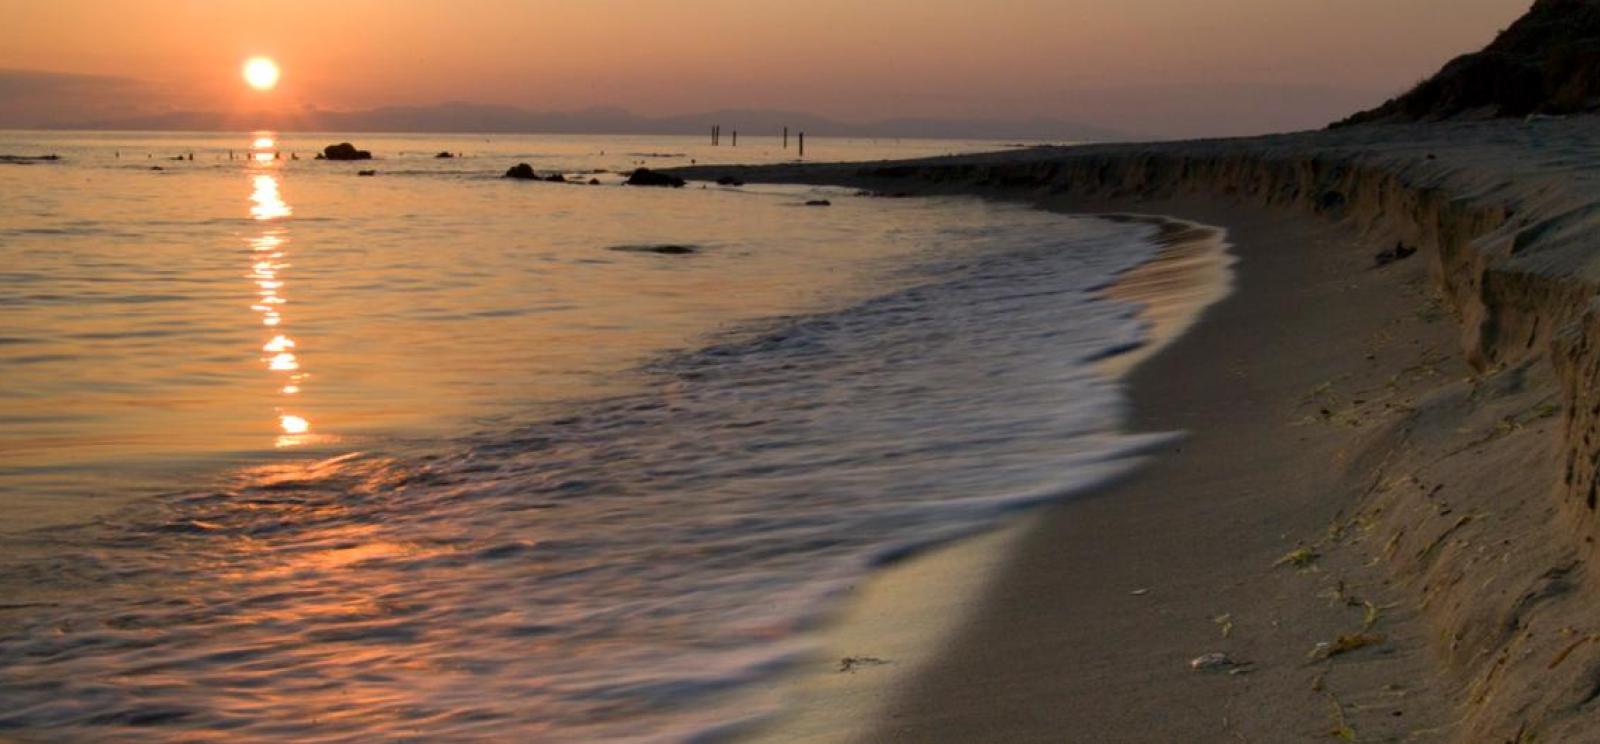 Photograph of a beach and shoreline at sunset.